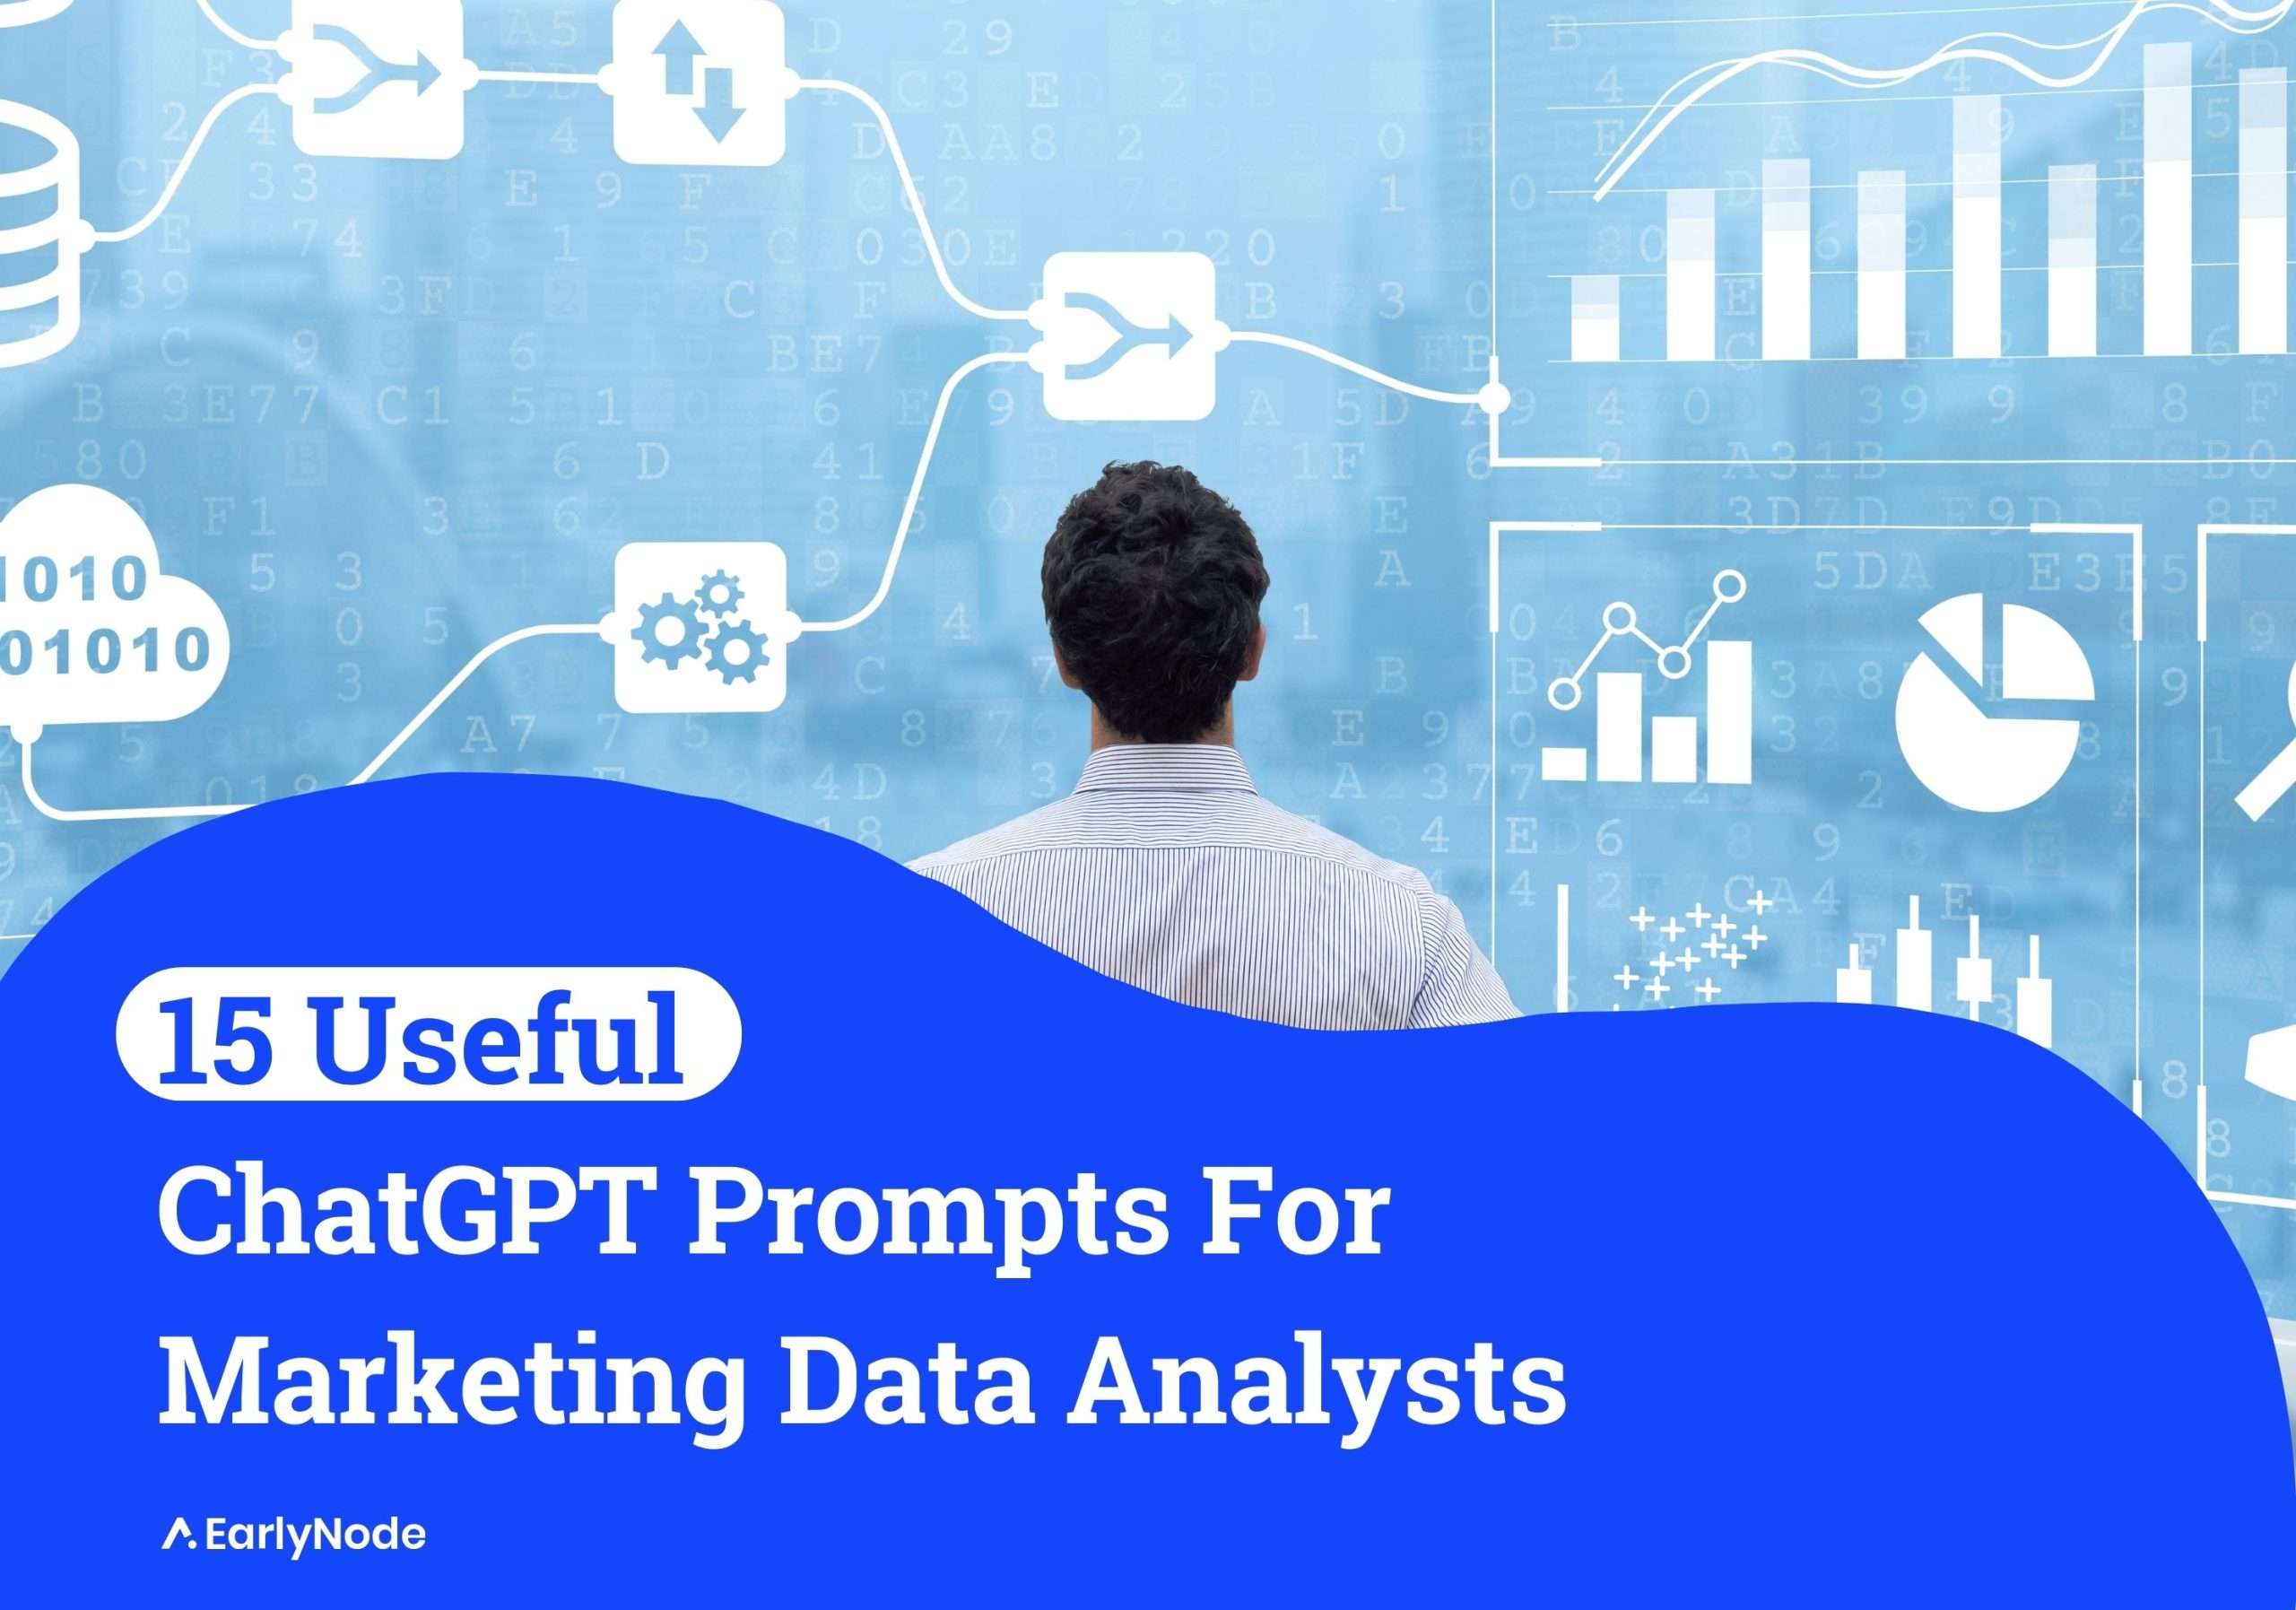 15+ Effective ChatGPT Prompts for Marketing Data Analysts